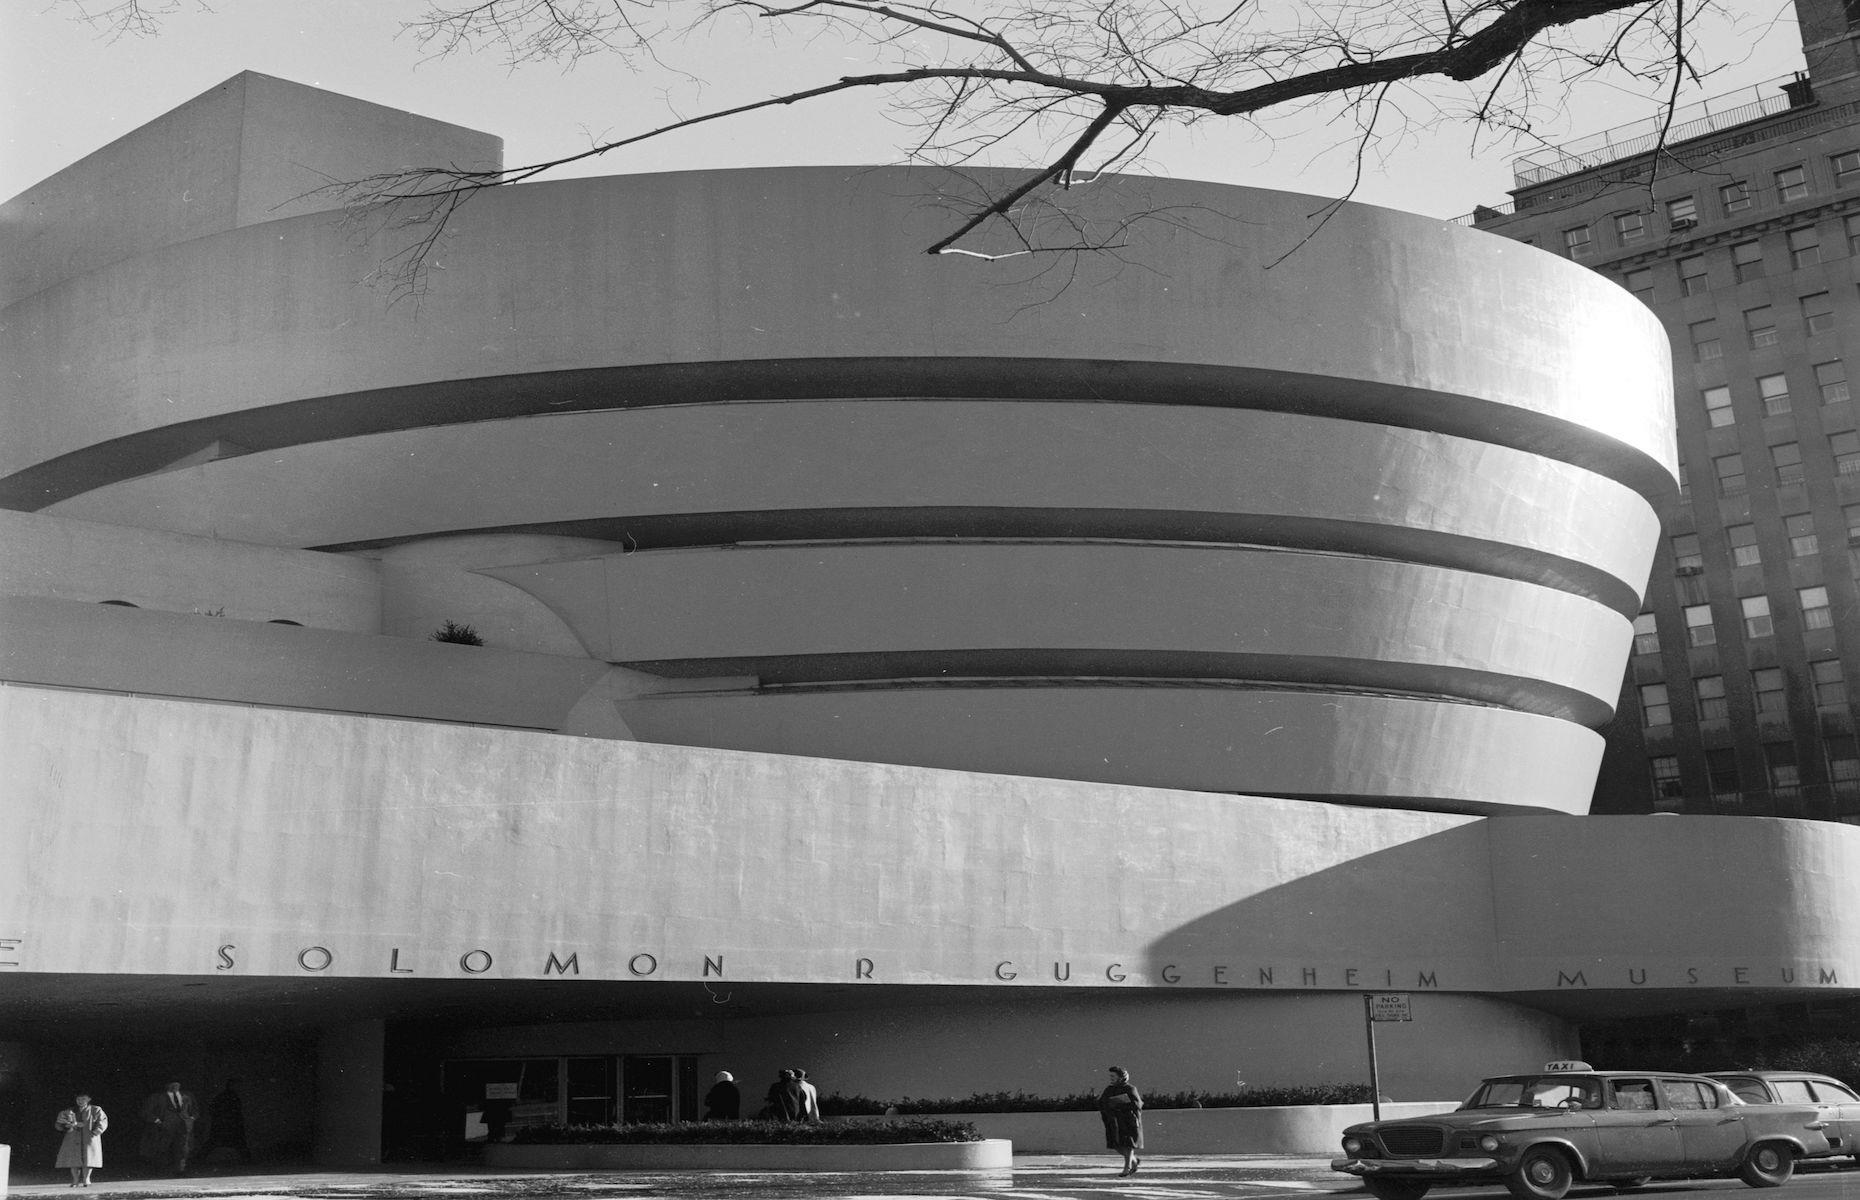 The Guggenheim Museum moved into its permanent home, the innovative Frank Lloyd Wright-designed building, in 1959. Originally founded in 1939 by the Solomon R. Guggenheim Foundation to house the businessman and art collector’s pieces, it was renamed the Solomon R. Guggenheim Museum in 1952. The modern art gallery, located on the corner of Fifth Avenue and East 89th Street, became one of the most significant architectural icons and cultural spaces of the 20th century.